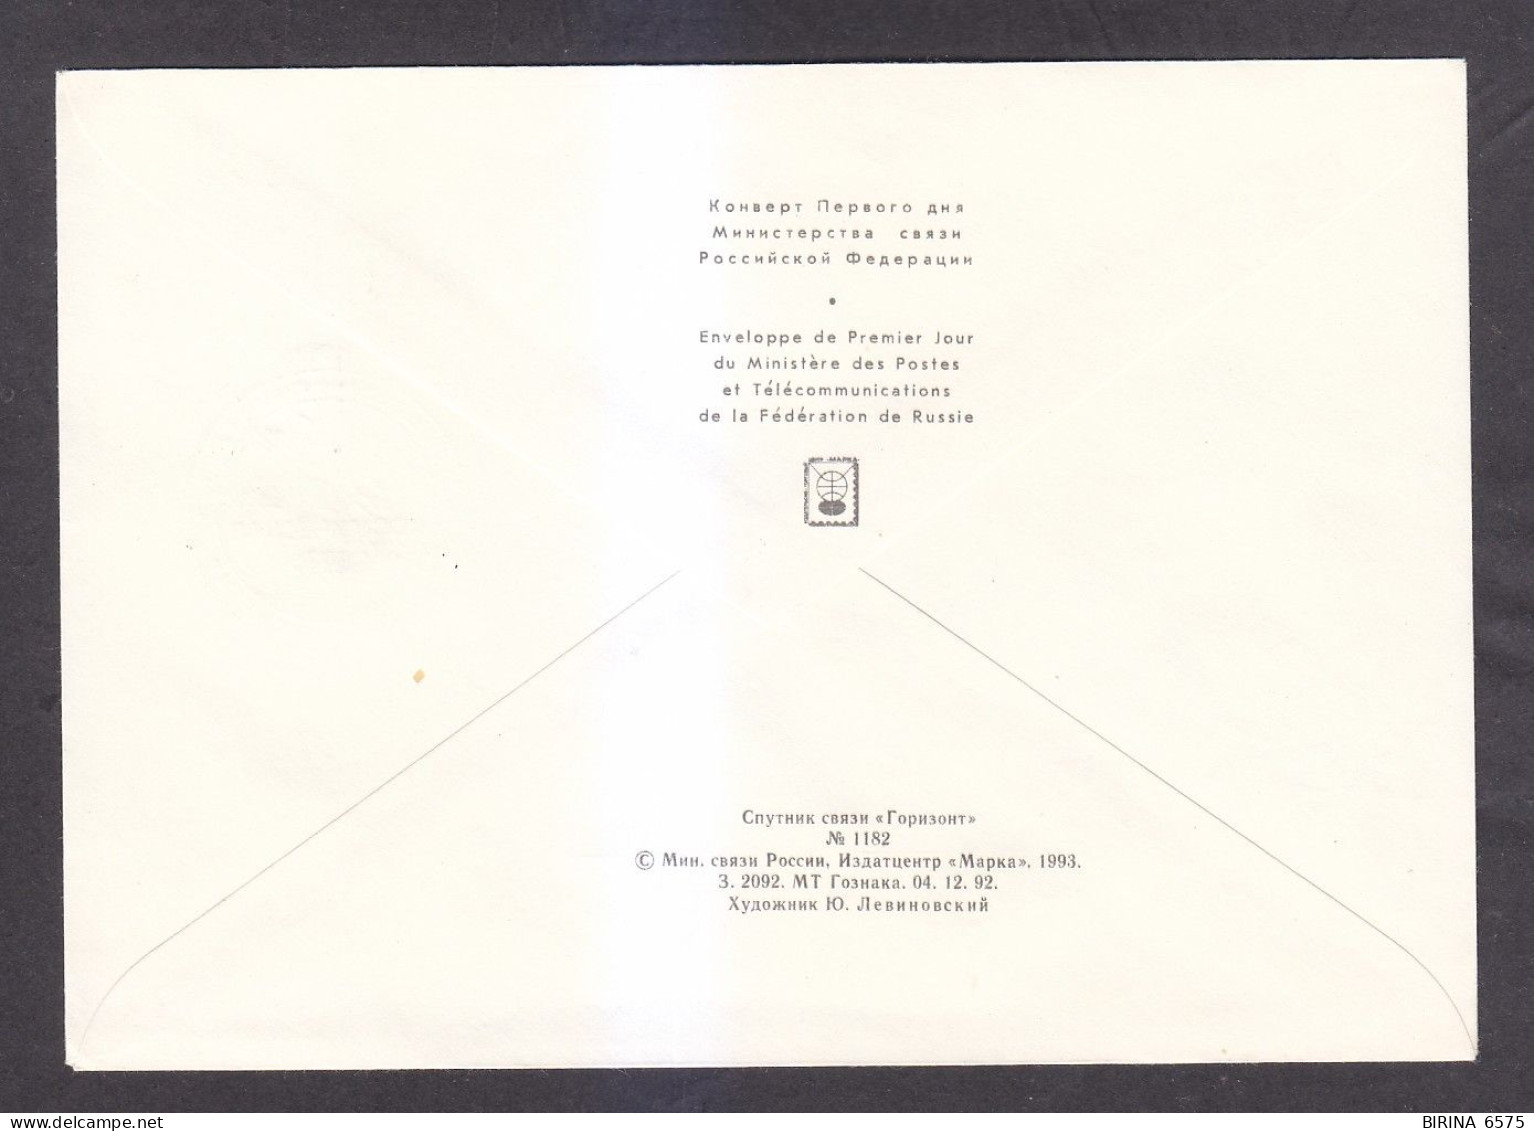 Envelope. Russia. SPACE COMMUNICATION. - 7-5 - Covers & Documents